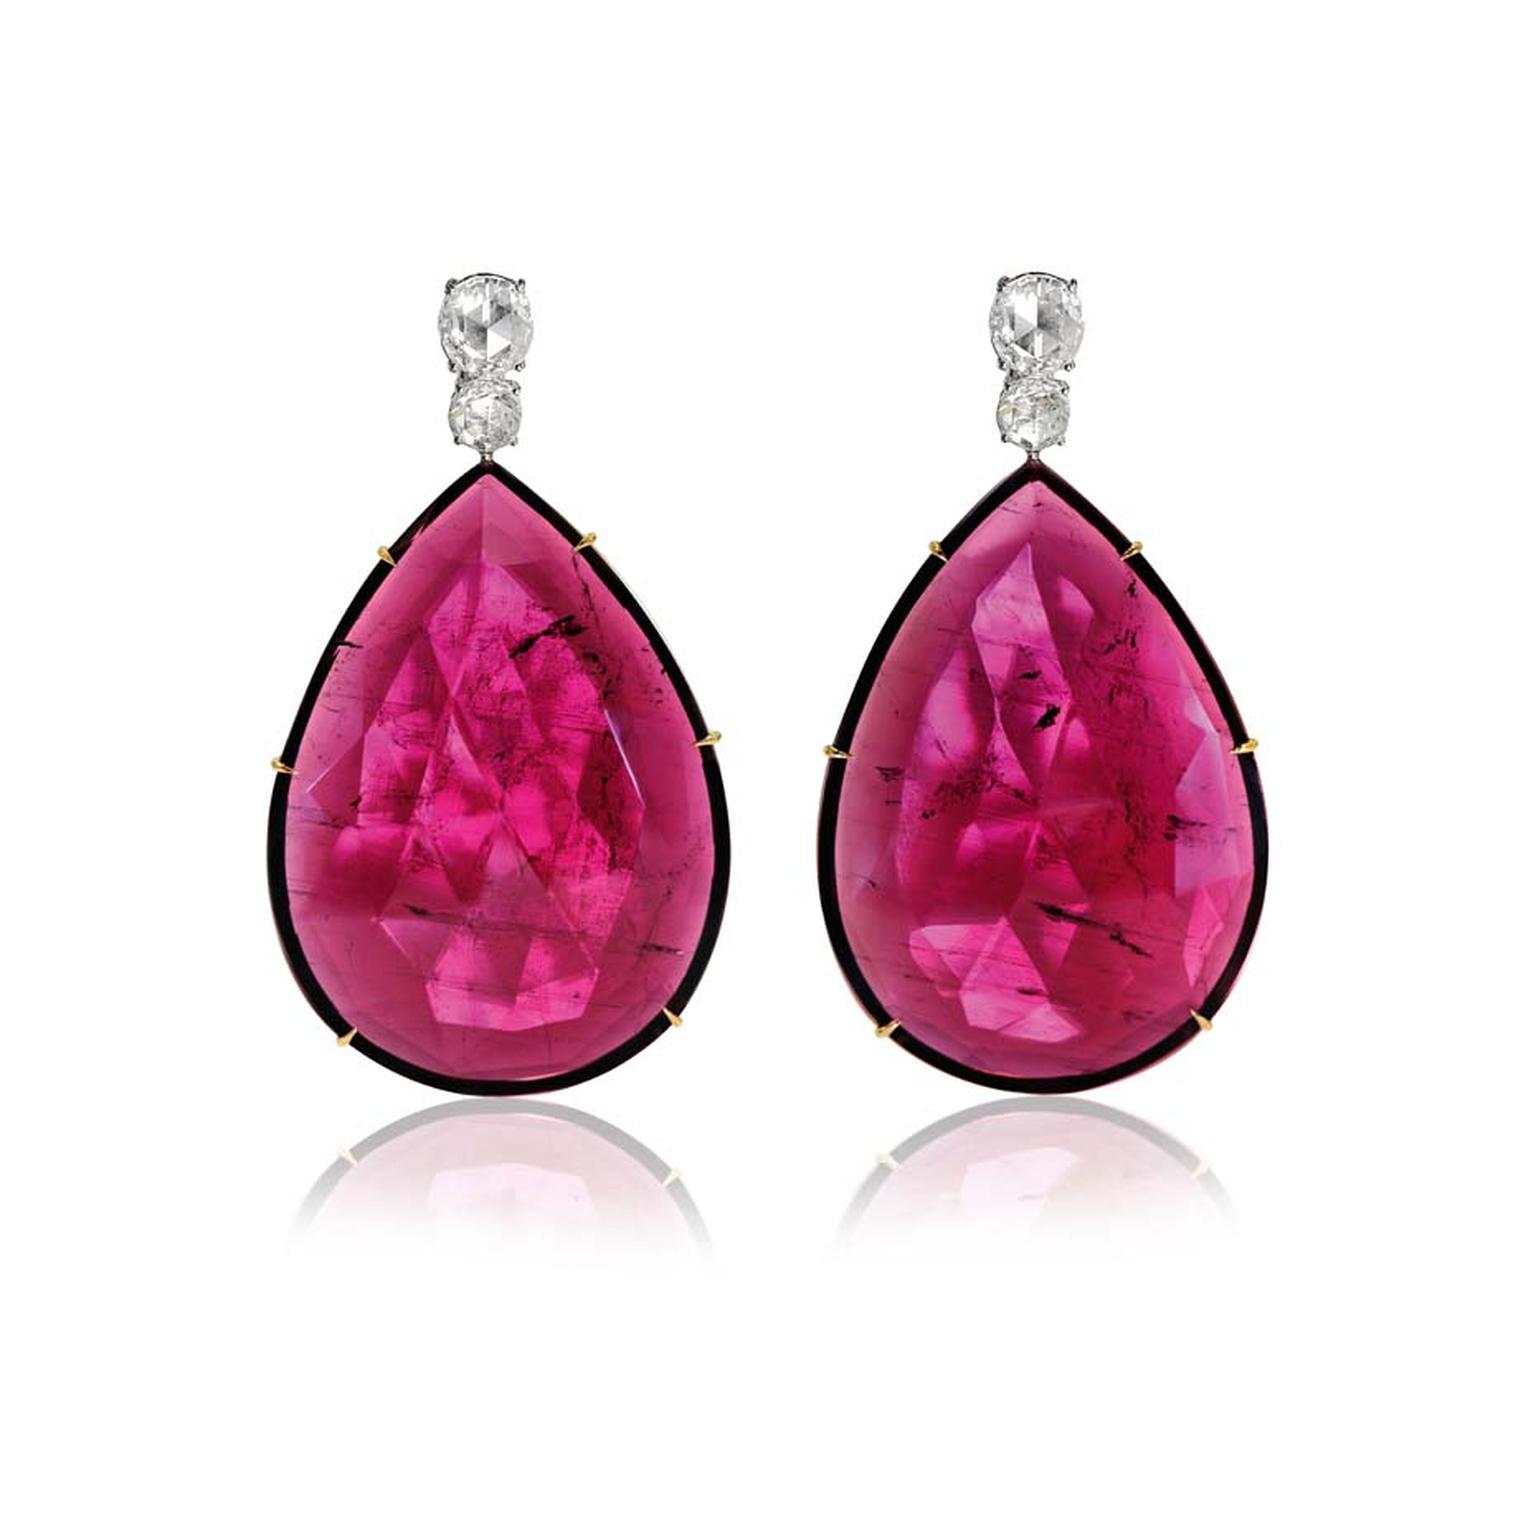 Rubellite high jewellery earrings in white and rose gold with diamonds by Brazilian jewellery designer Ara Vartanian.